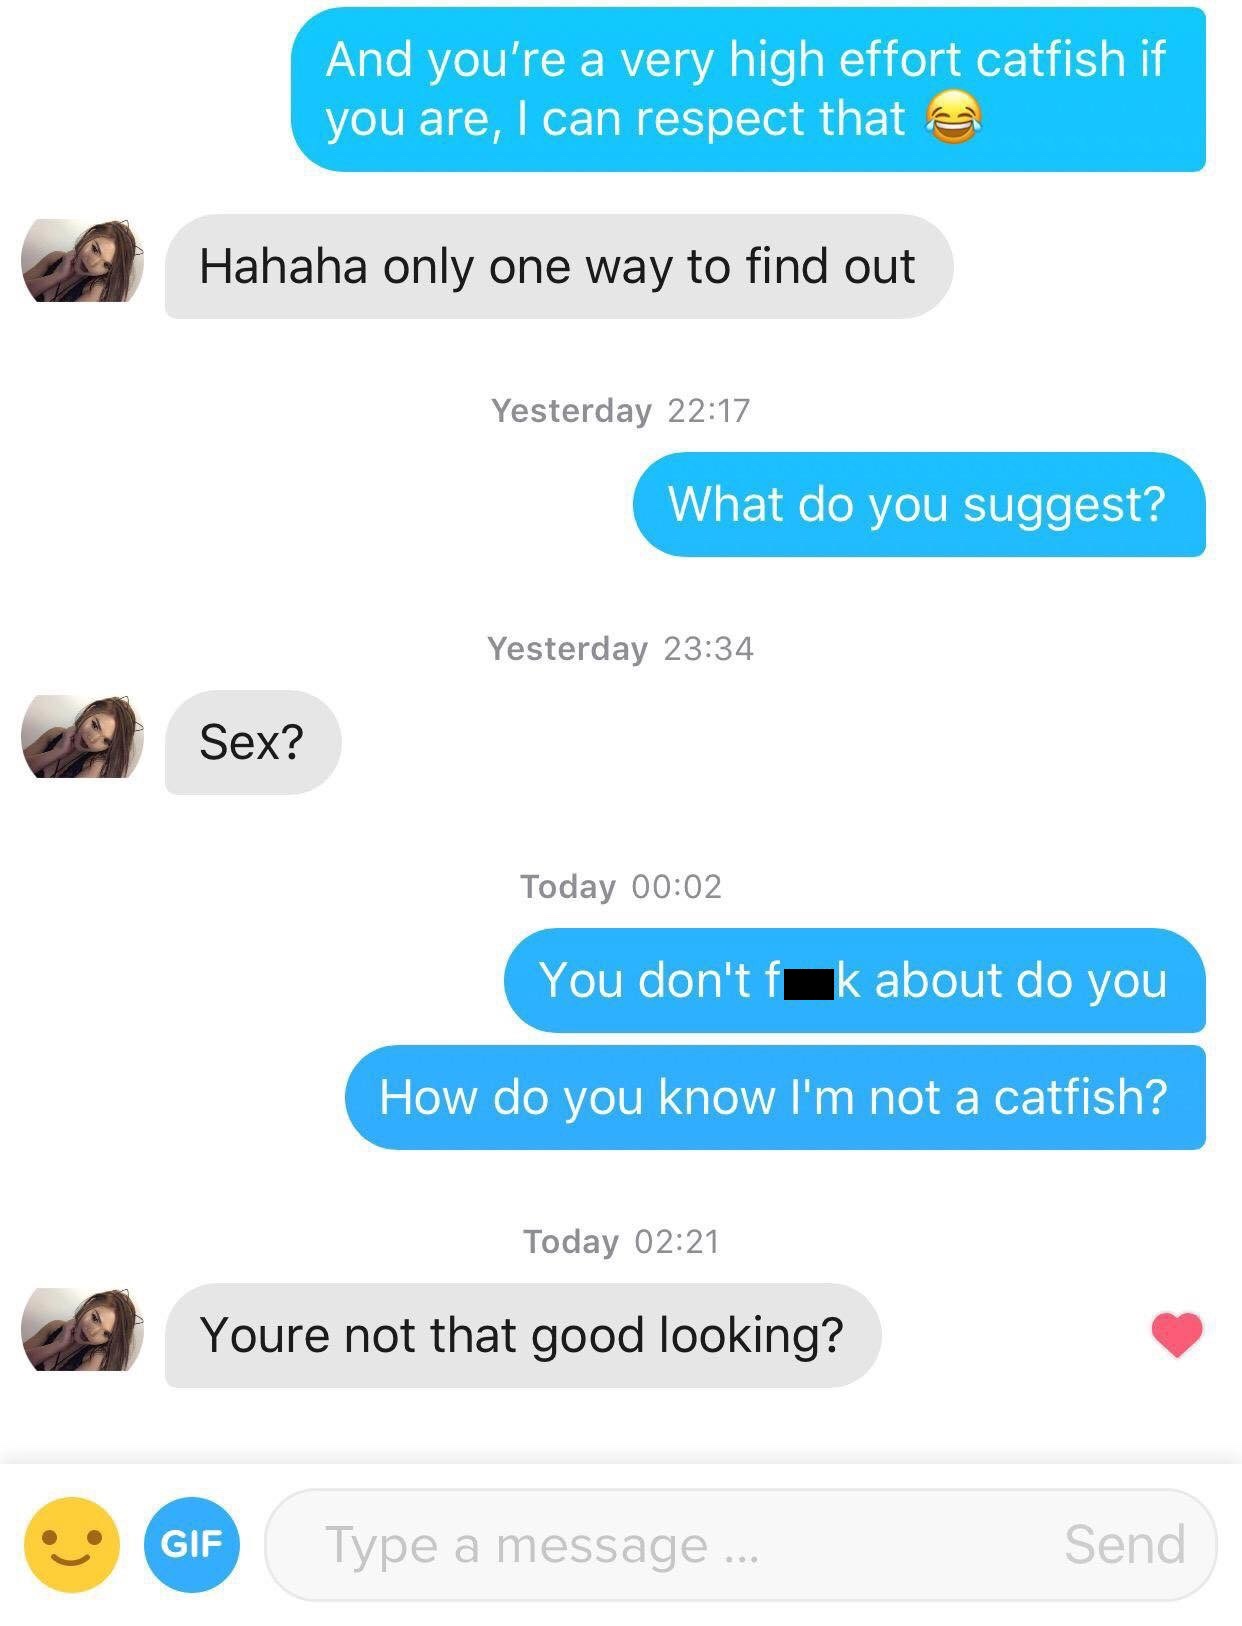 tinder - web page - And you're a very high effort catfish if you are, I can respect that a Hahaha only one way to find out Yesterday What do you suggest? Yesterday A Sex? Sex? Today You don't fk about do you How do you know I'm not a catfish? Today Youre 